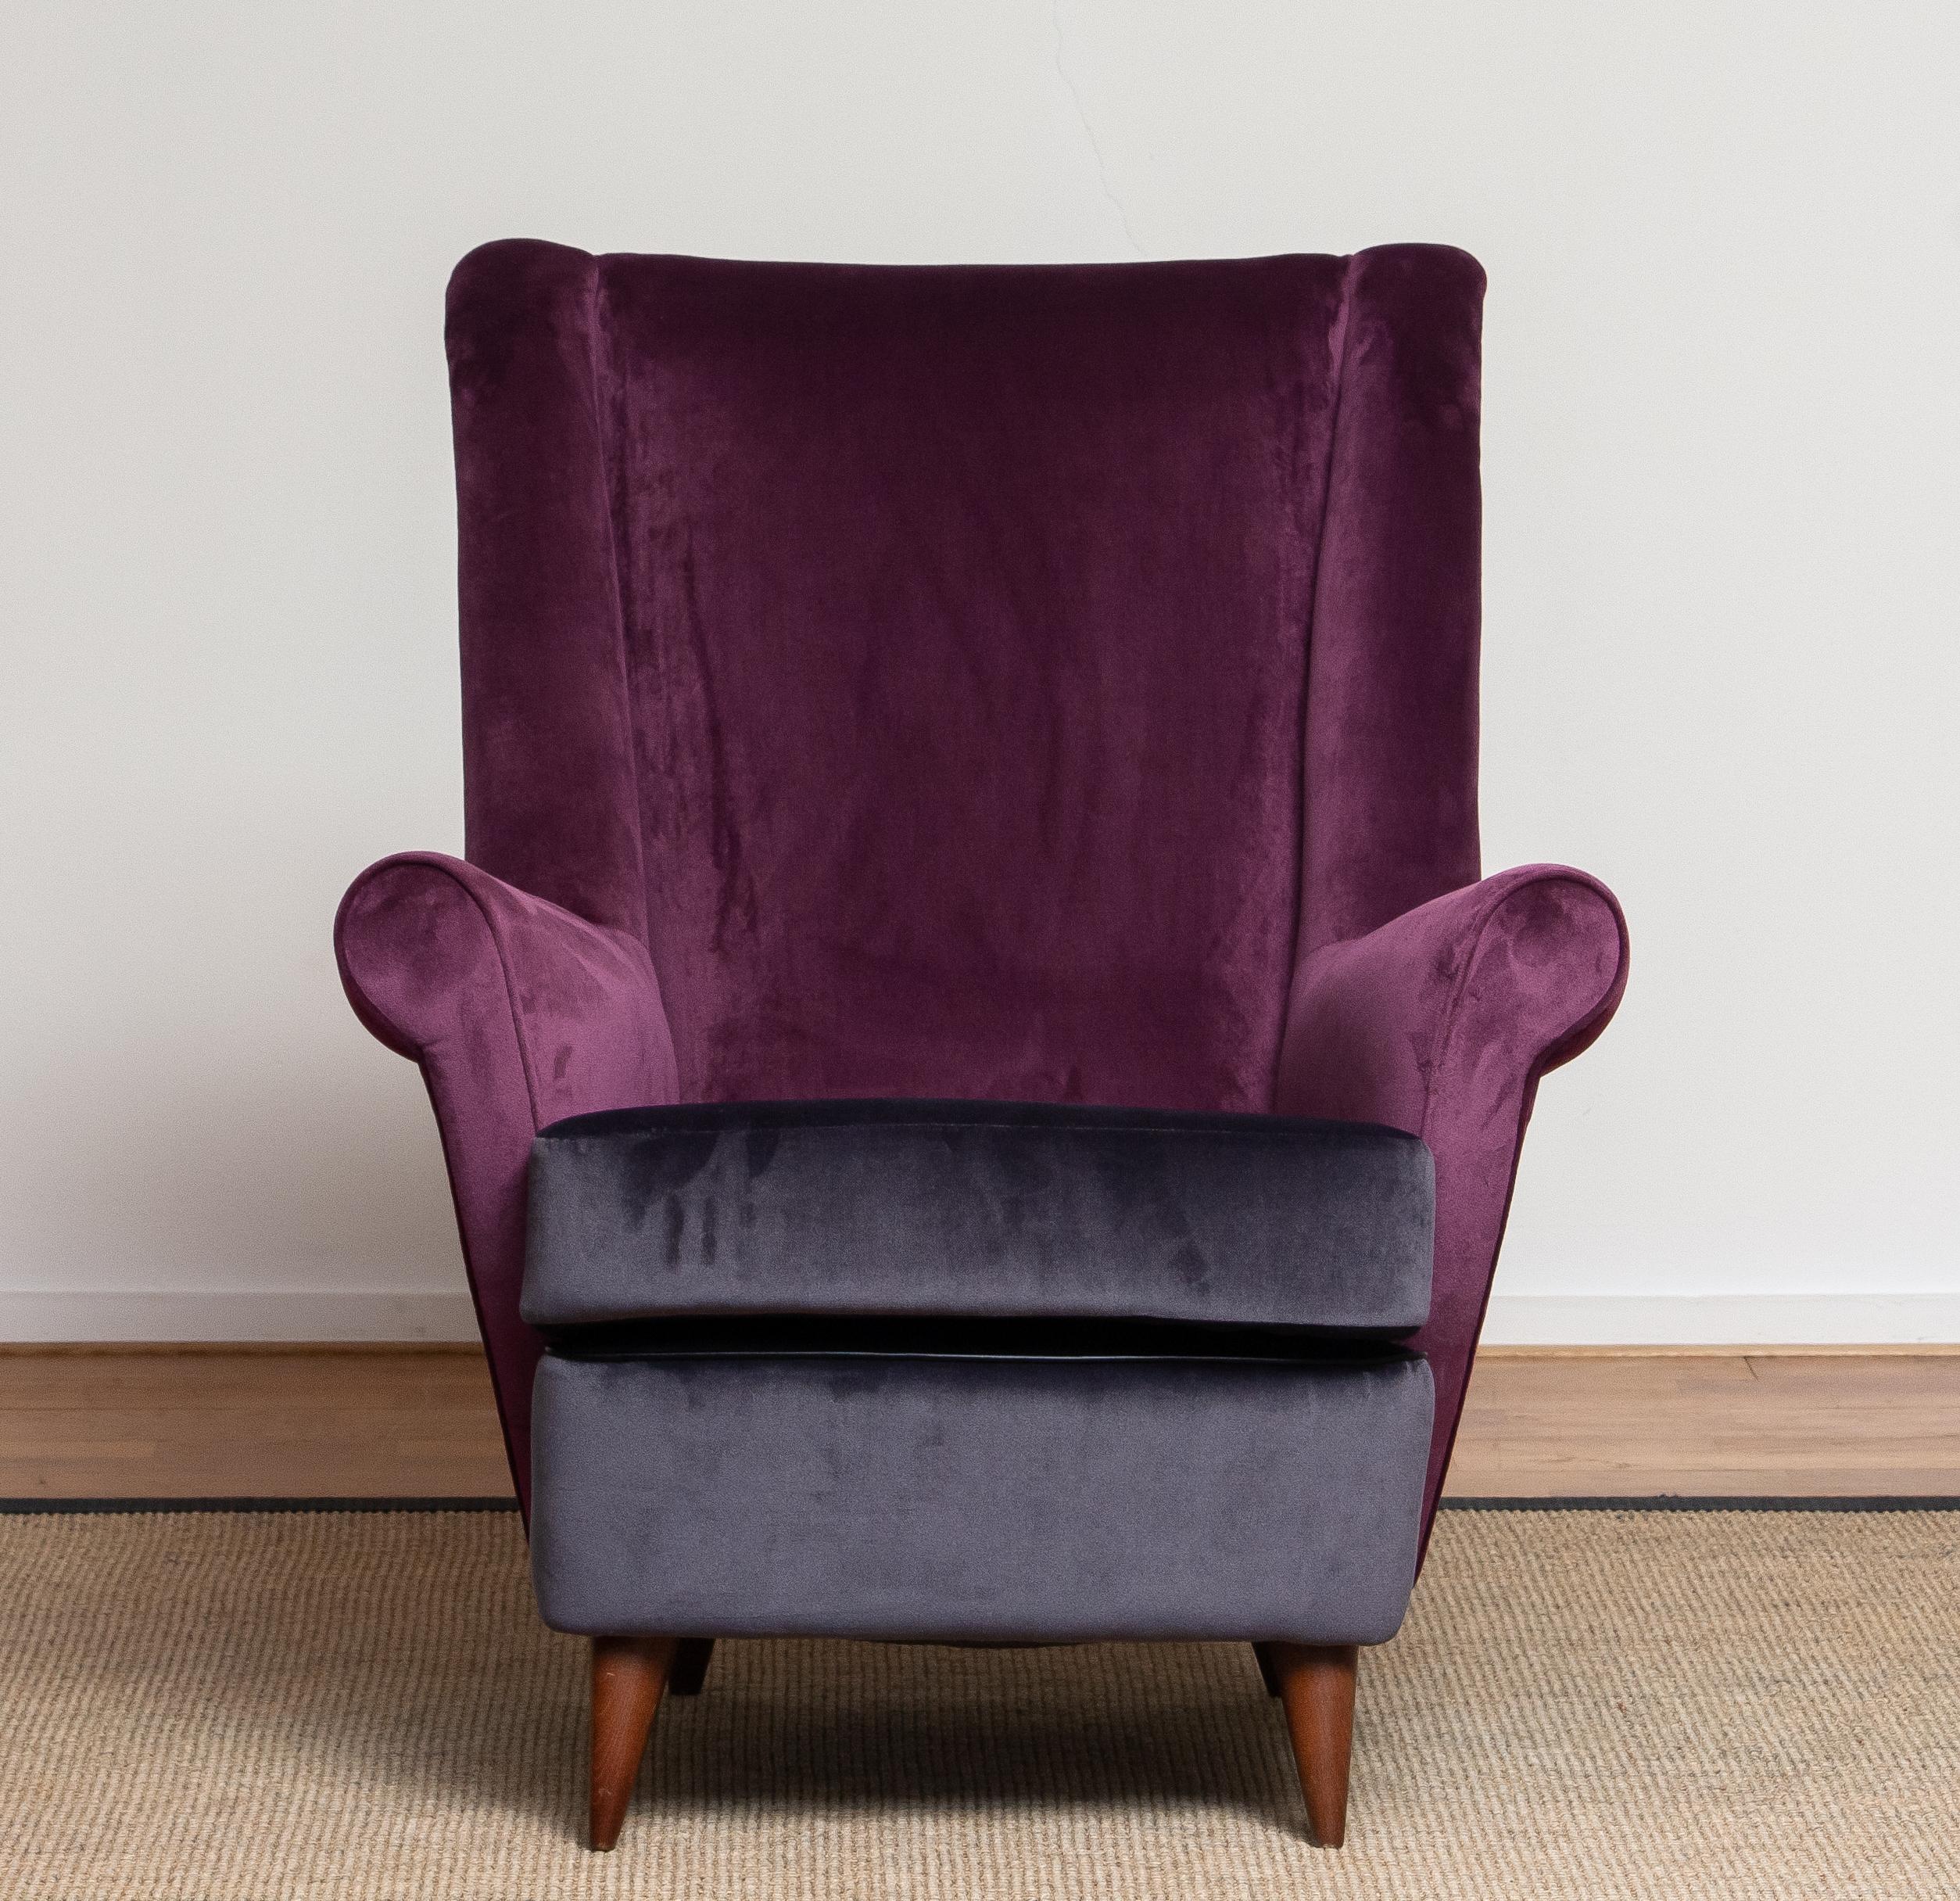 Mid-20th Century 1950 Lounge / Easy Chair in Magenta by Designed Gio Ponti for ISA Bergamo, Italy